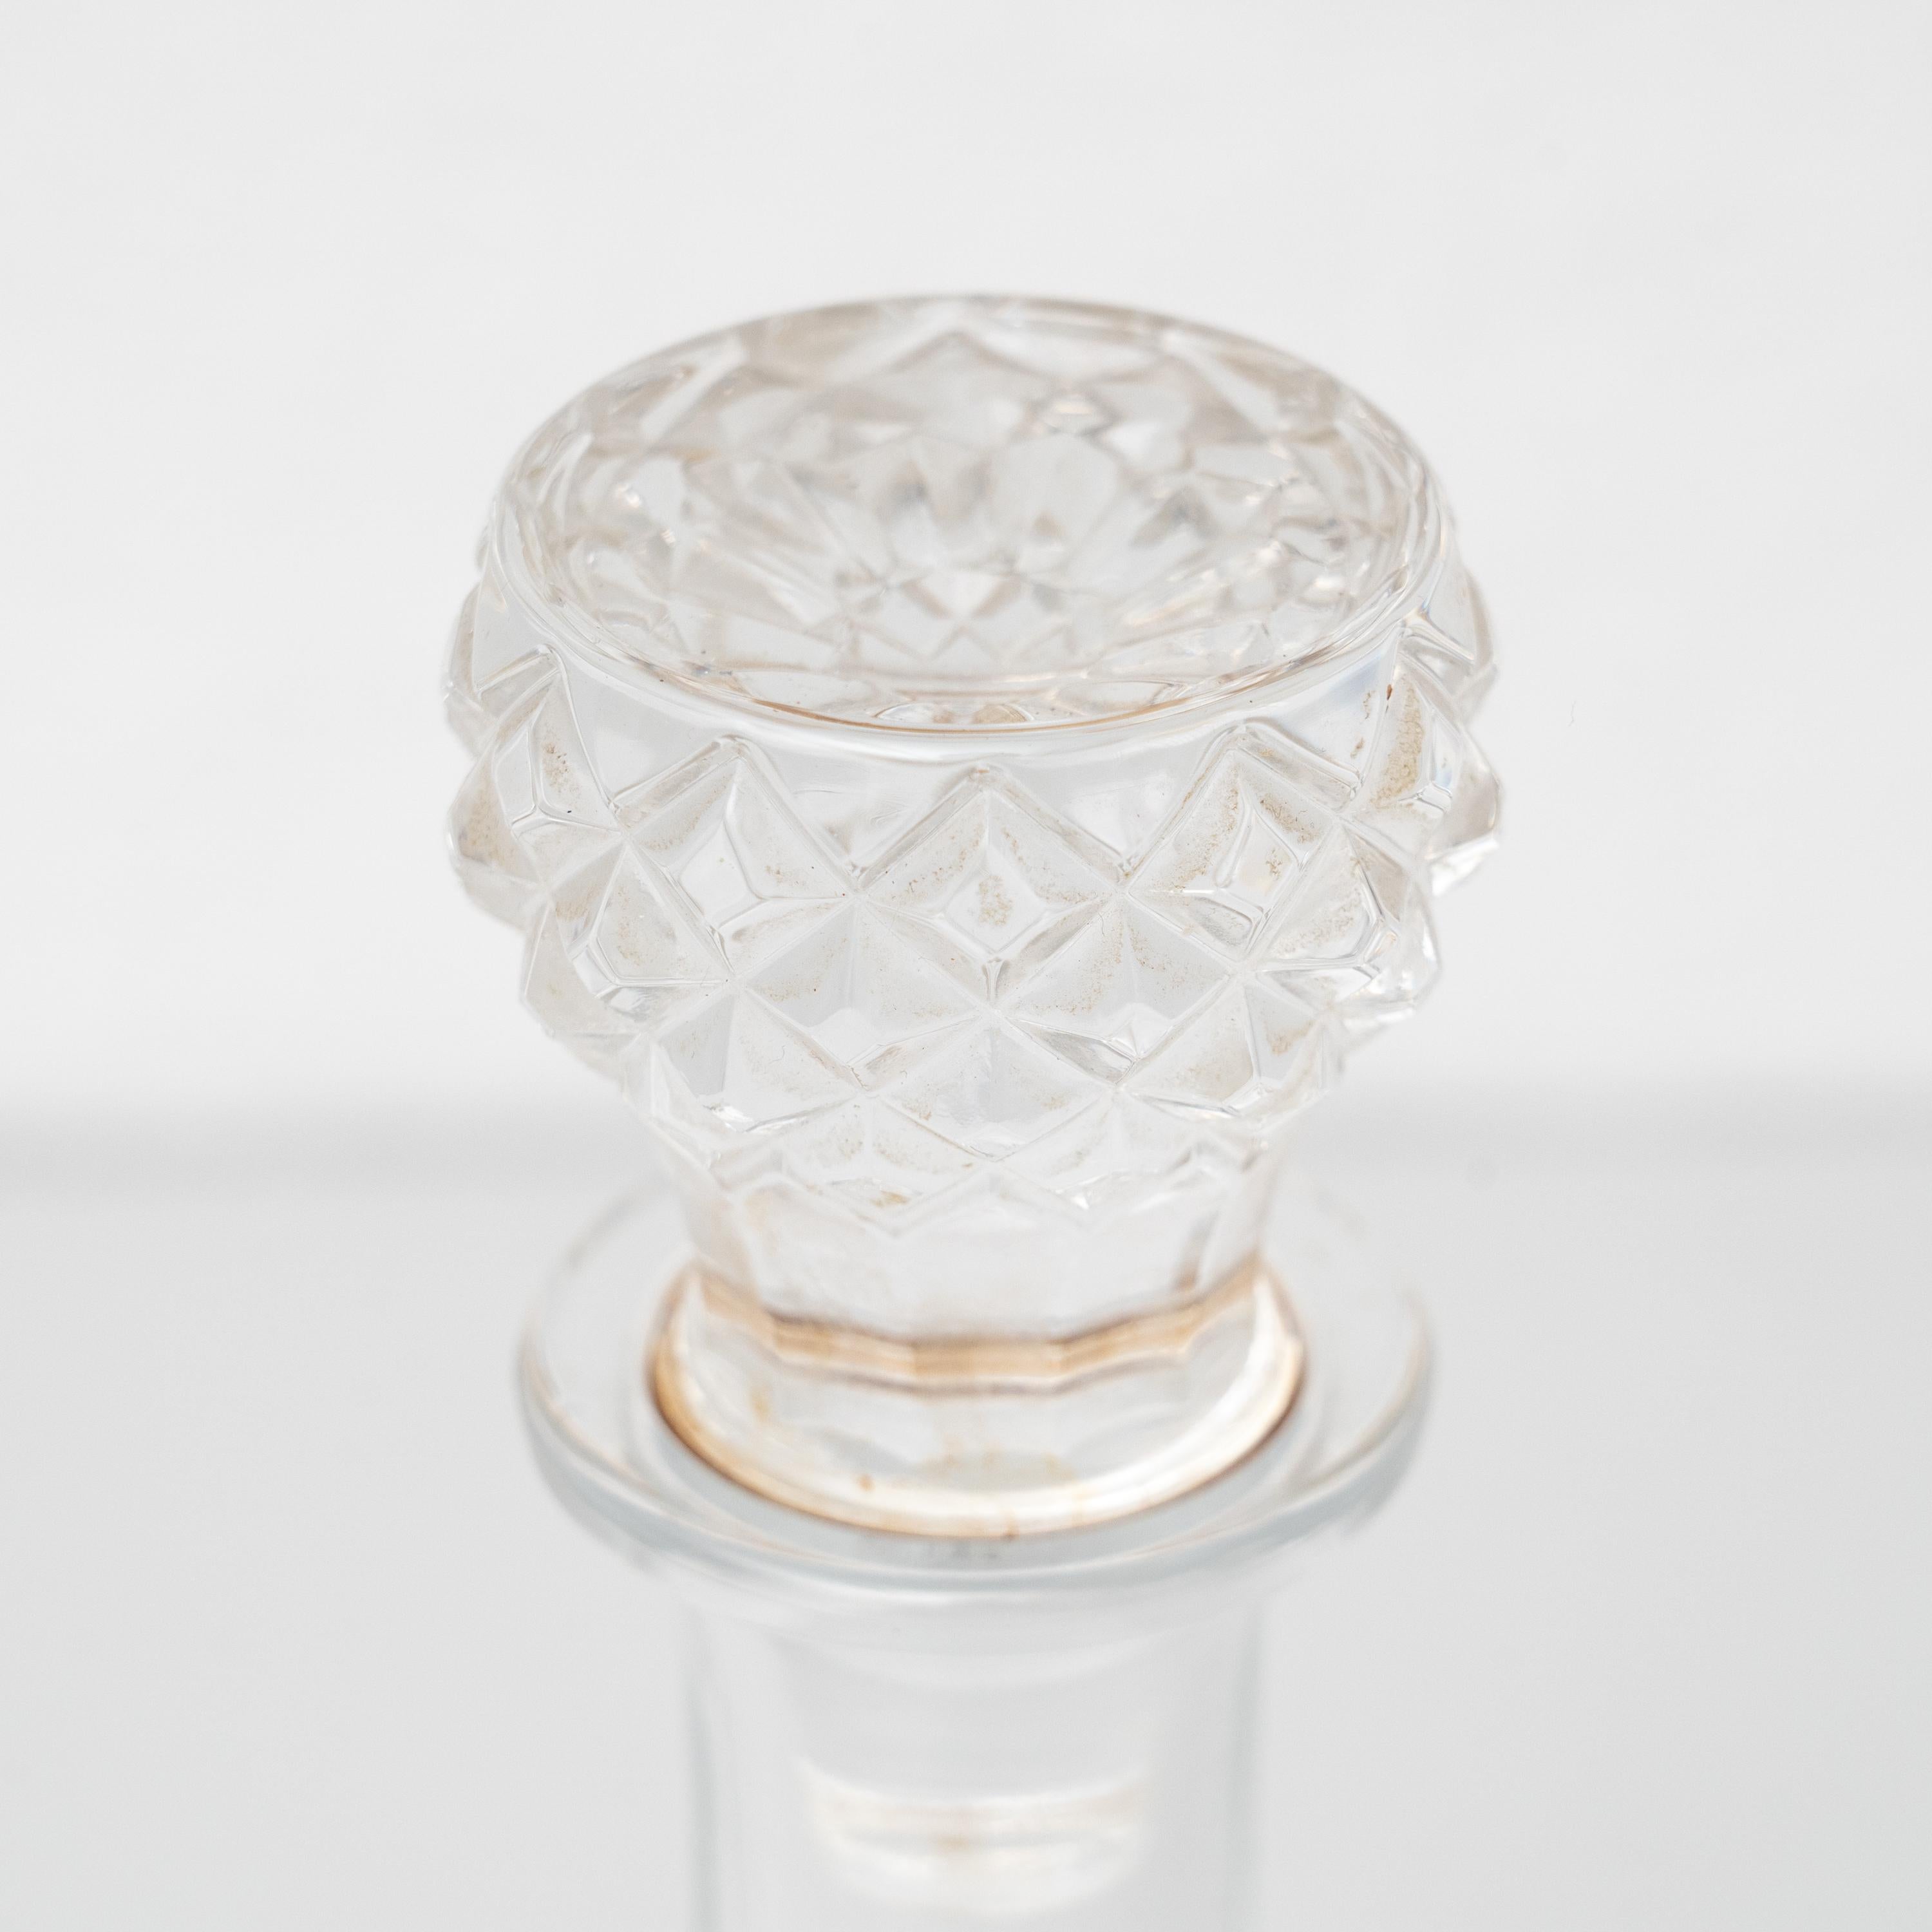  Vintage Glass Vase with Diamond Capped Style, Circa 1930  For Sale 4